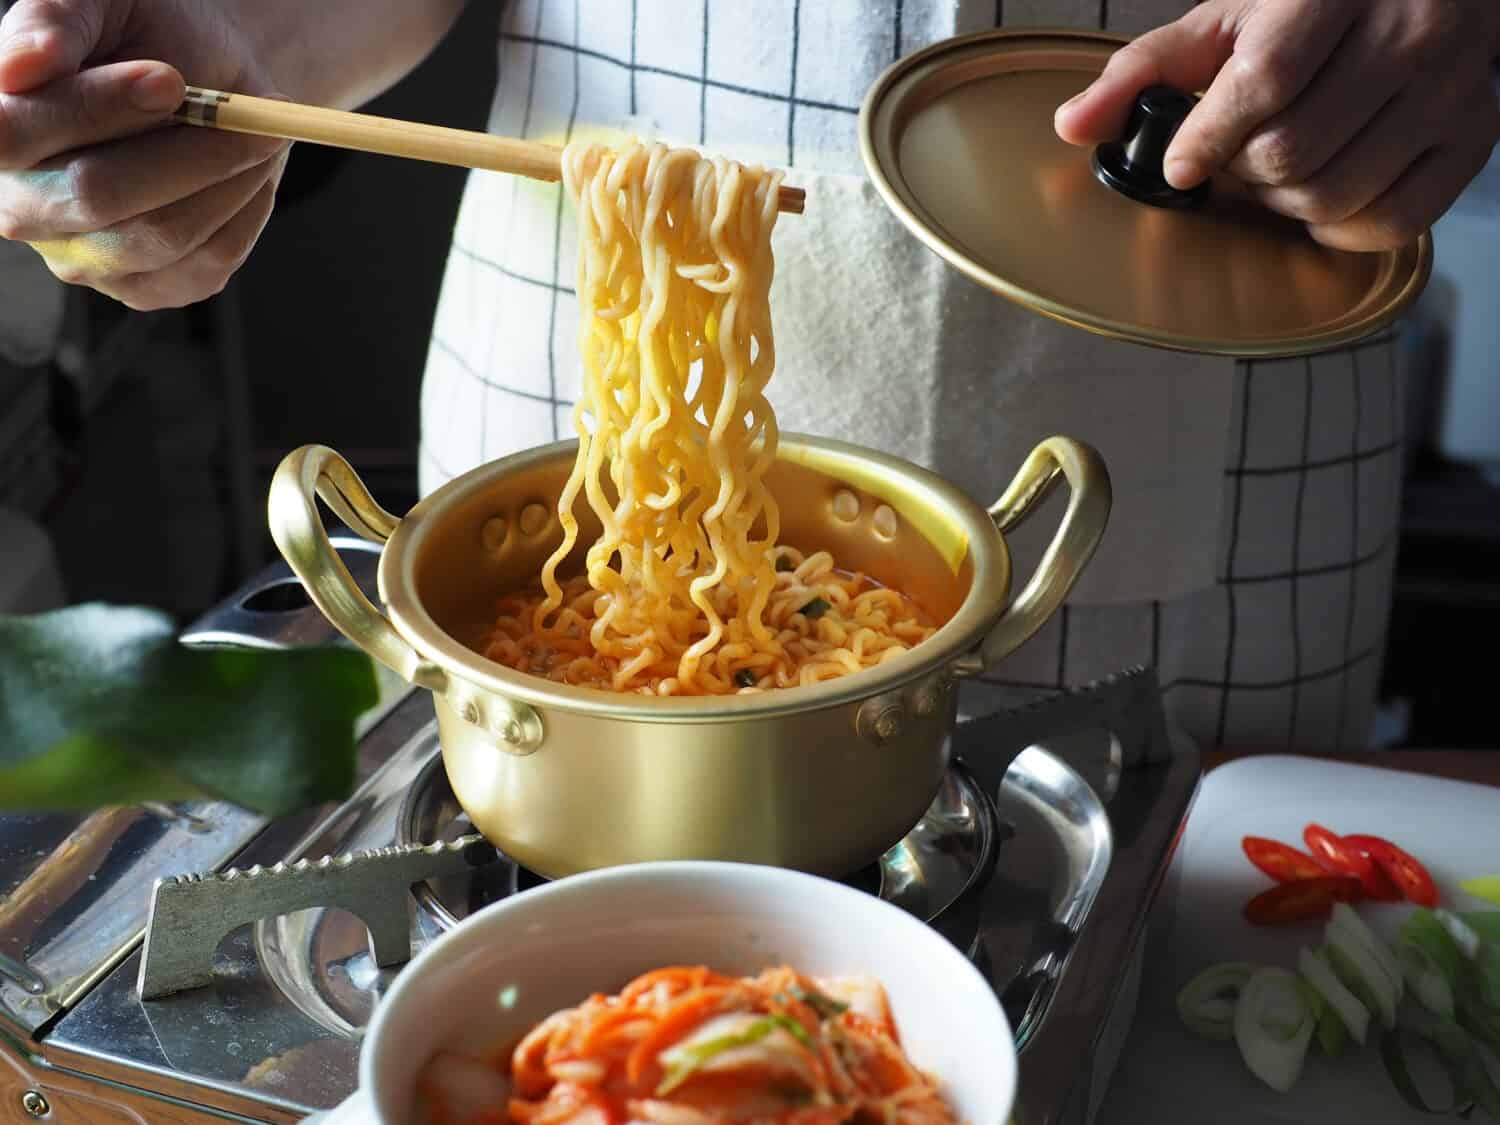 People using chopsticks to cook ramyeon or Korean instant noodles soup in double handle Korean yellow aluminum pot on gas stove over wooden table with bowl of kimchi, slided red chili, scallion.